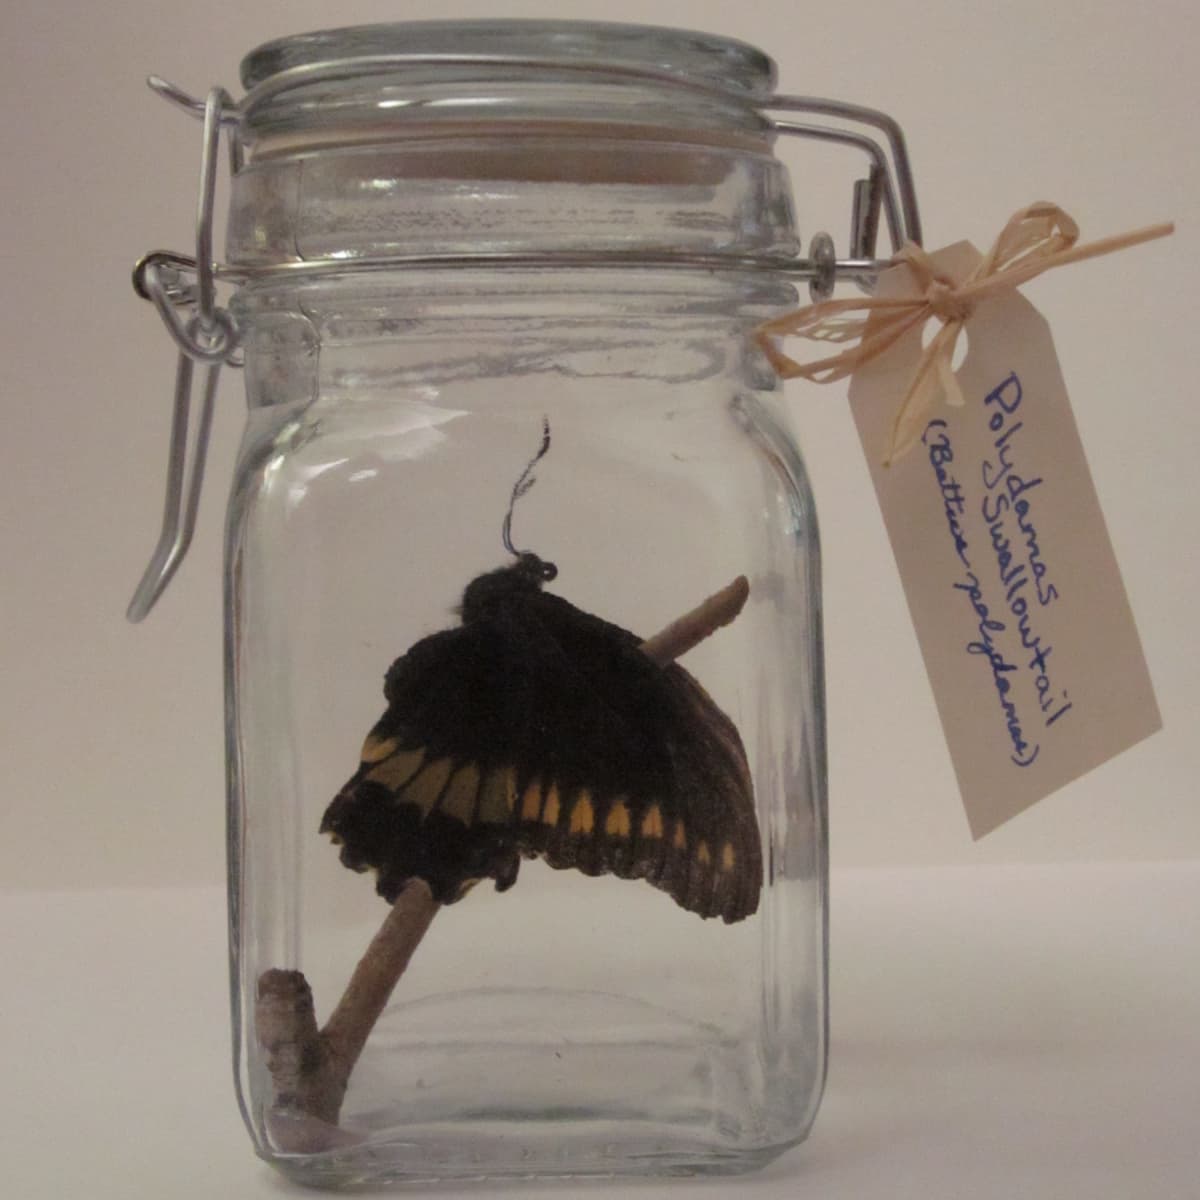 The Butterfly Company: Preserved Dried Butterflies & Insects